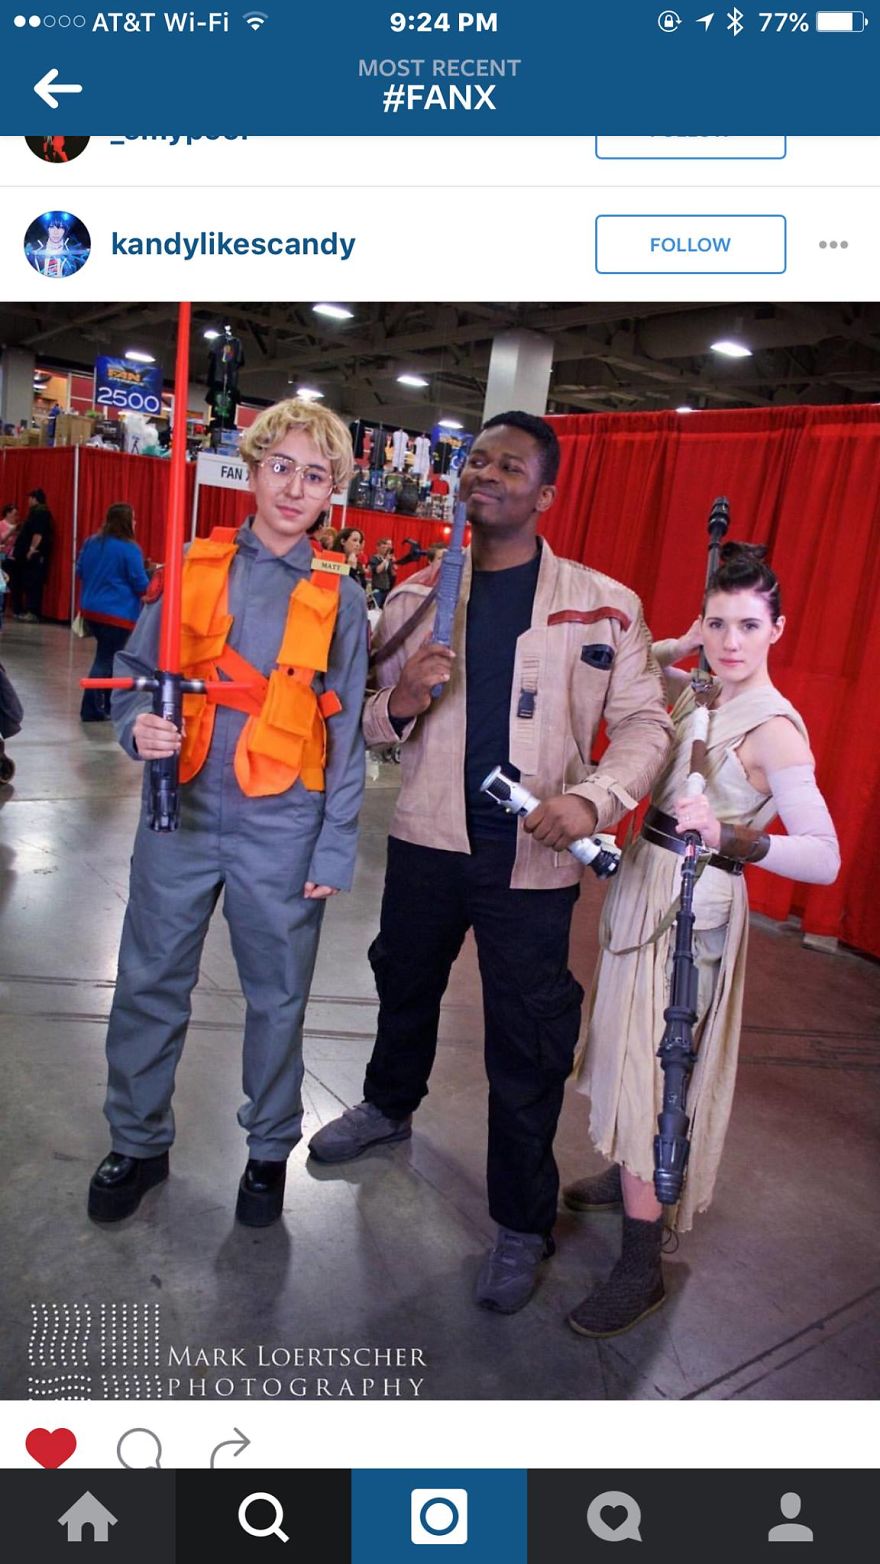 A New Hope For The Star Wars Family: The Story Behind Your Favorite Force Awakens Cosplayers